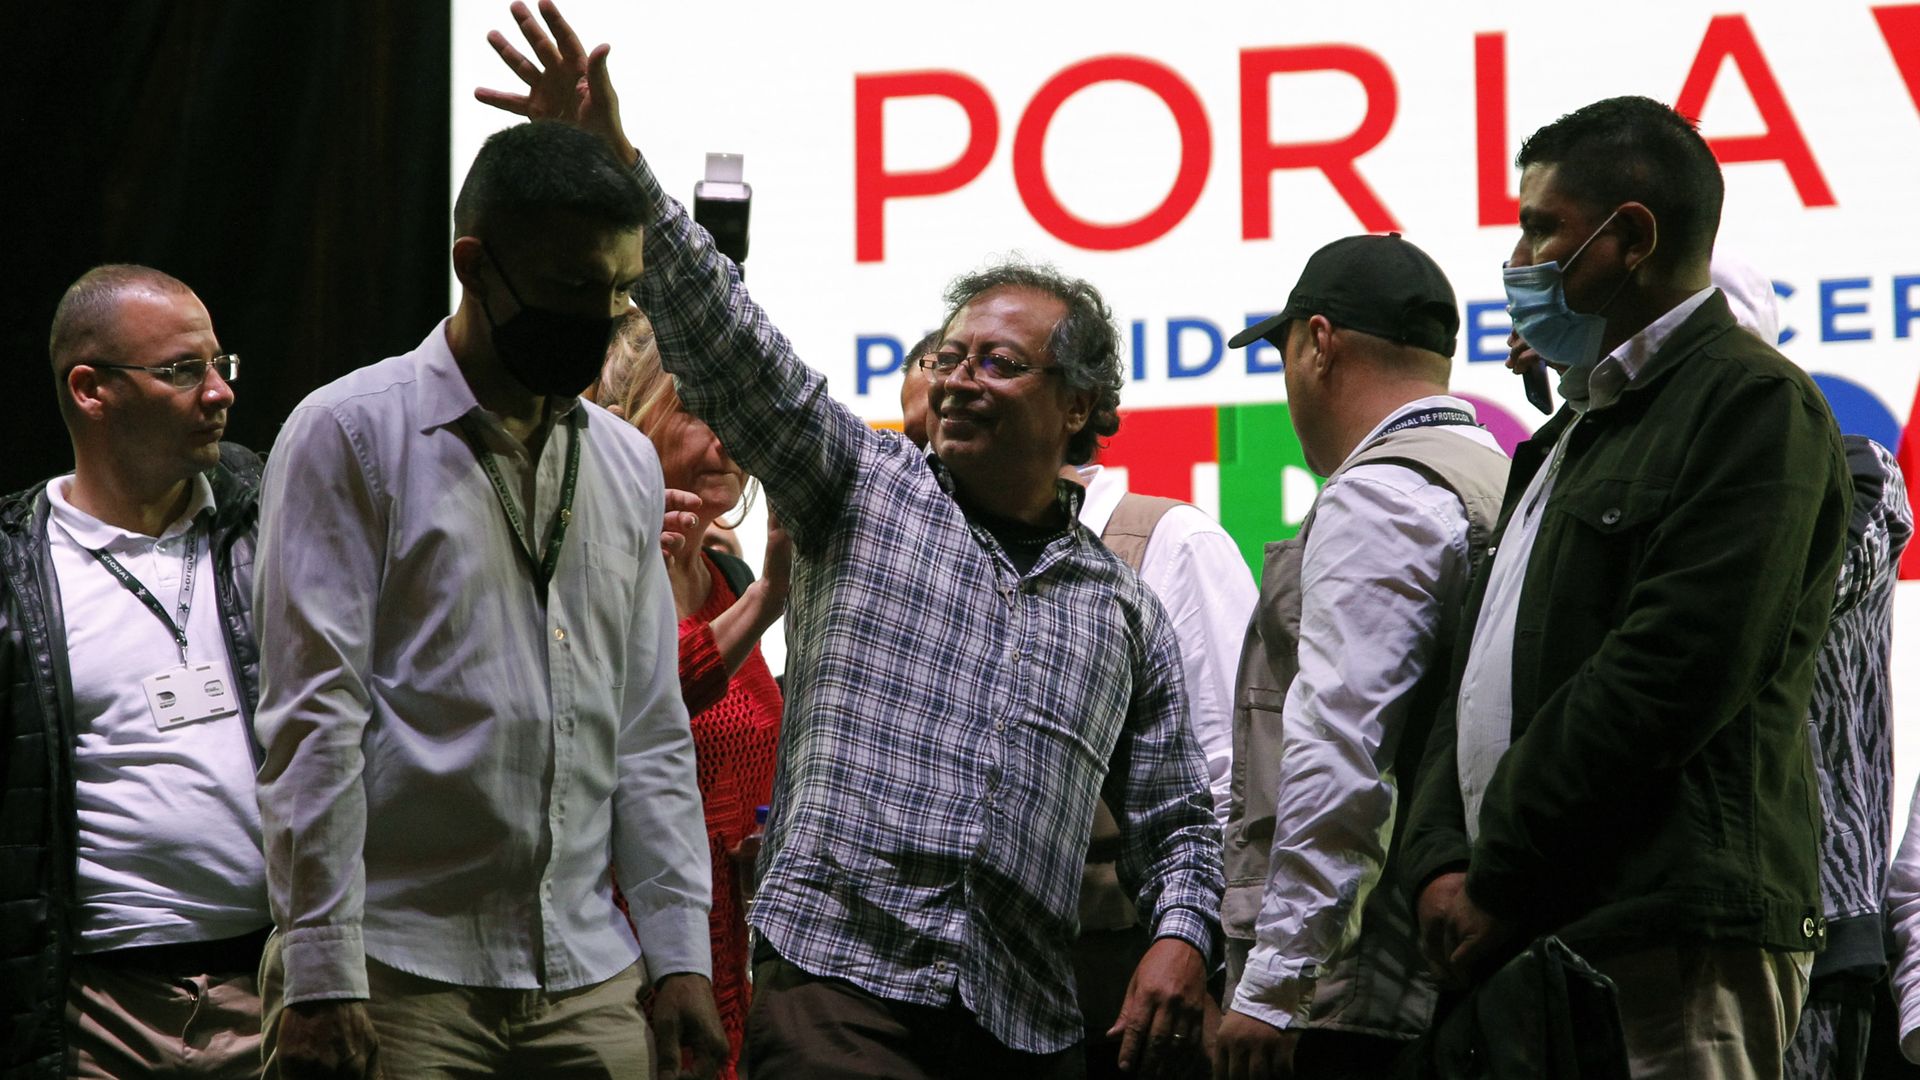 Colombian presidential candidate Gustavo Petro waves to a crowd